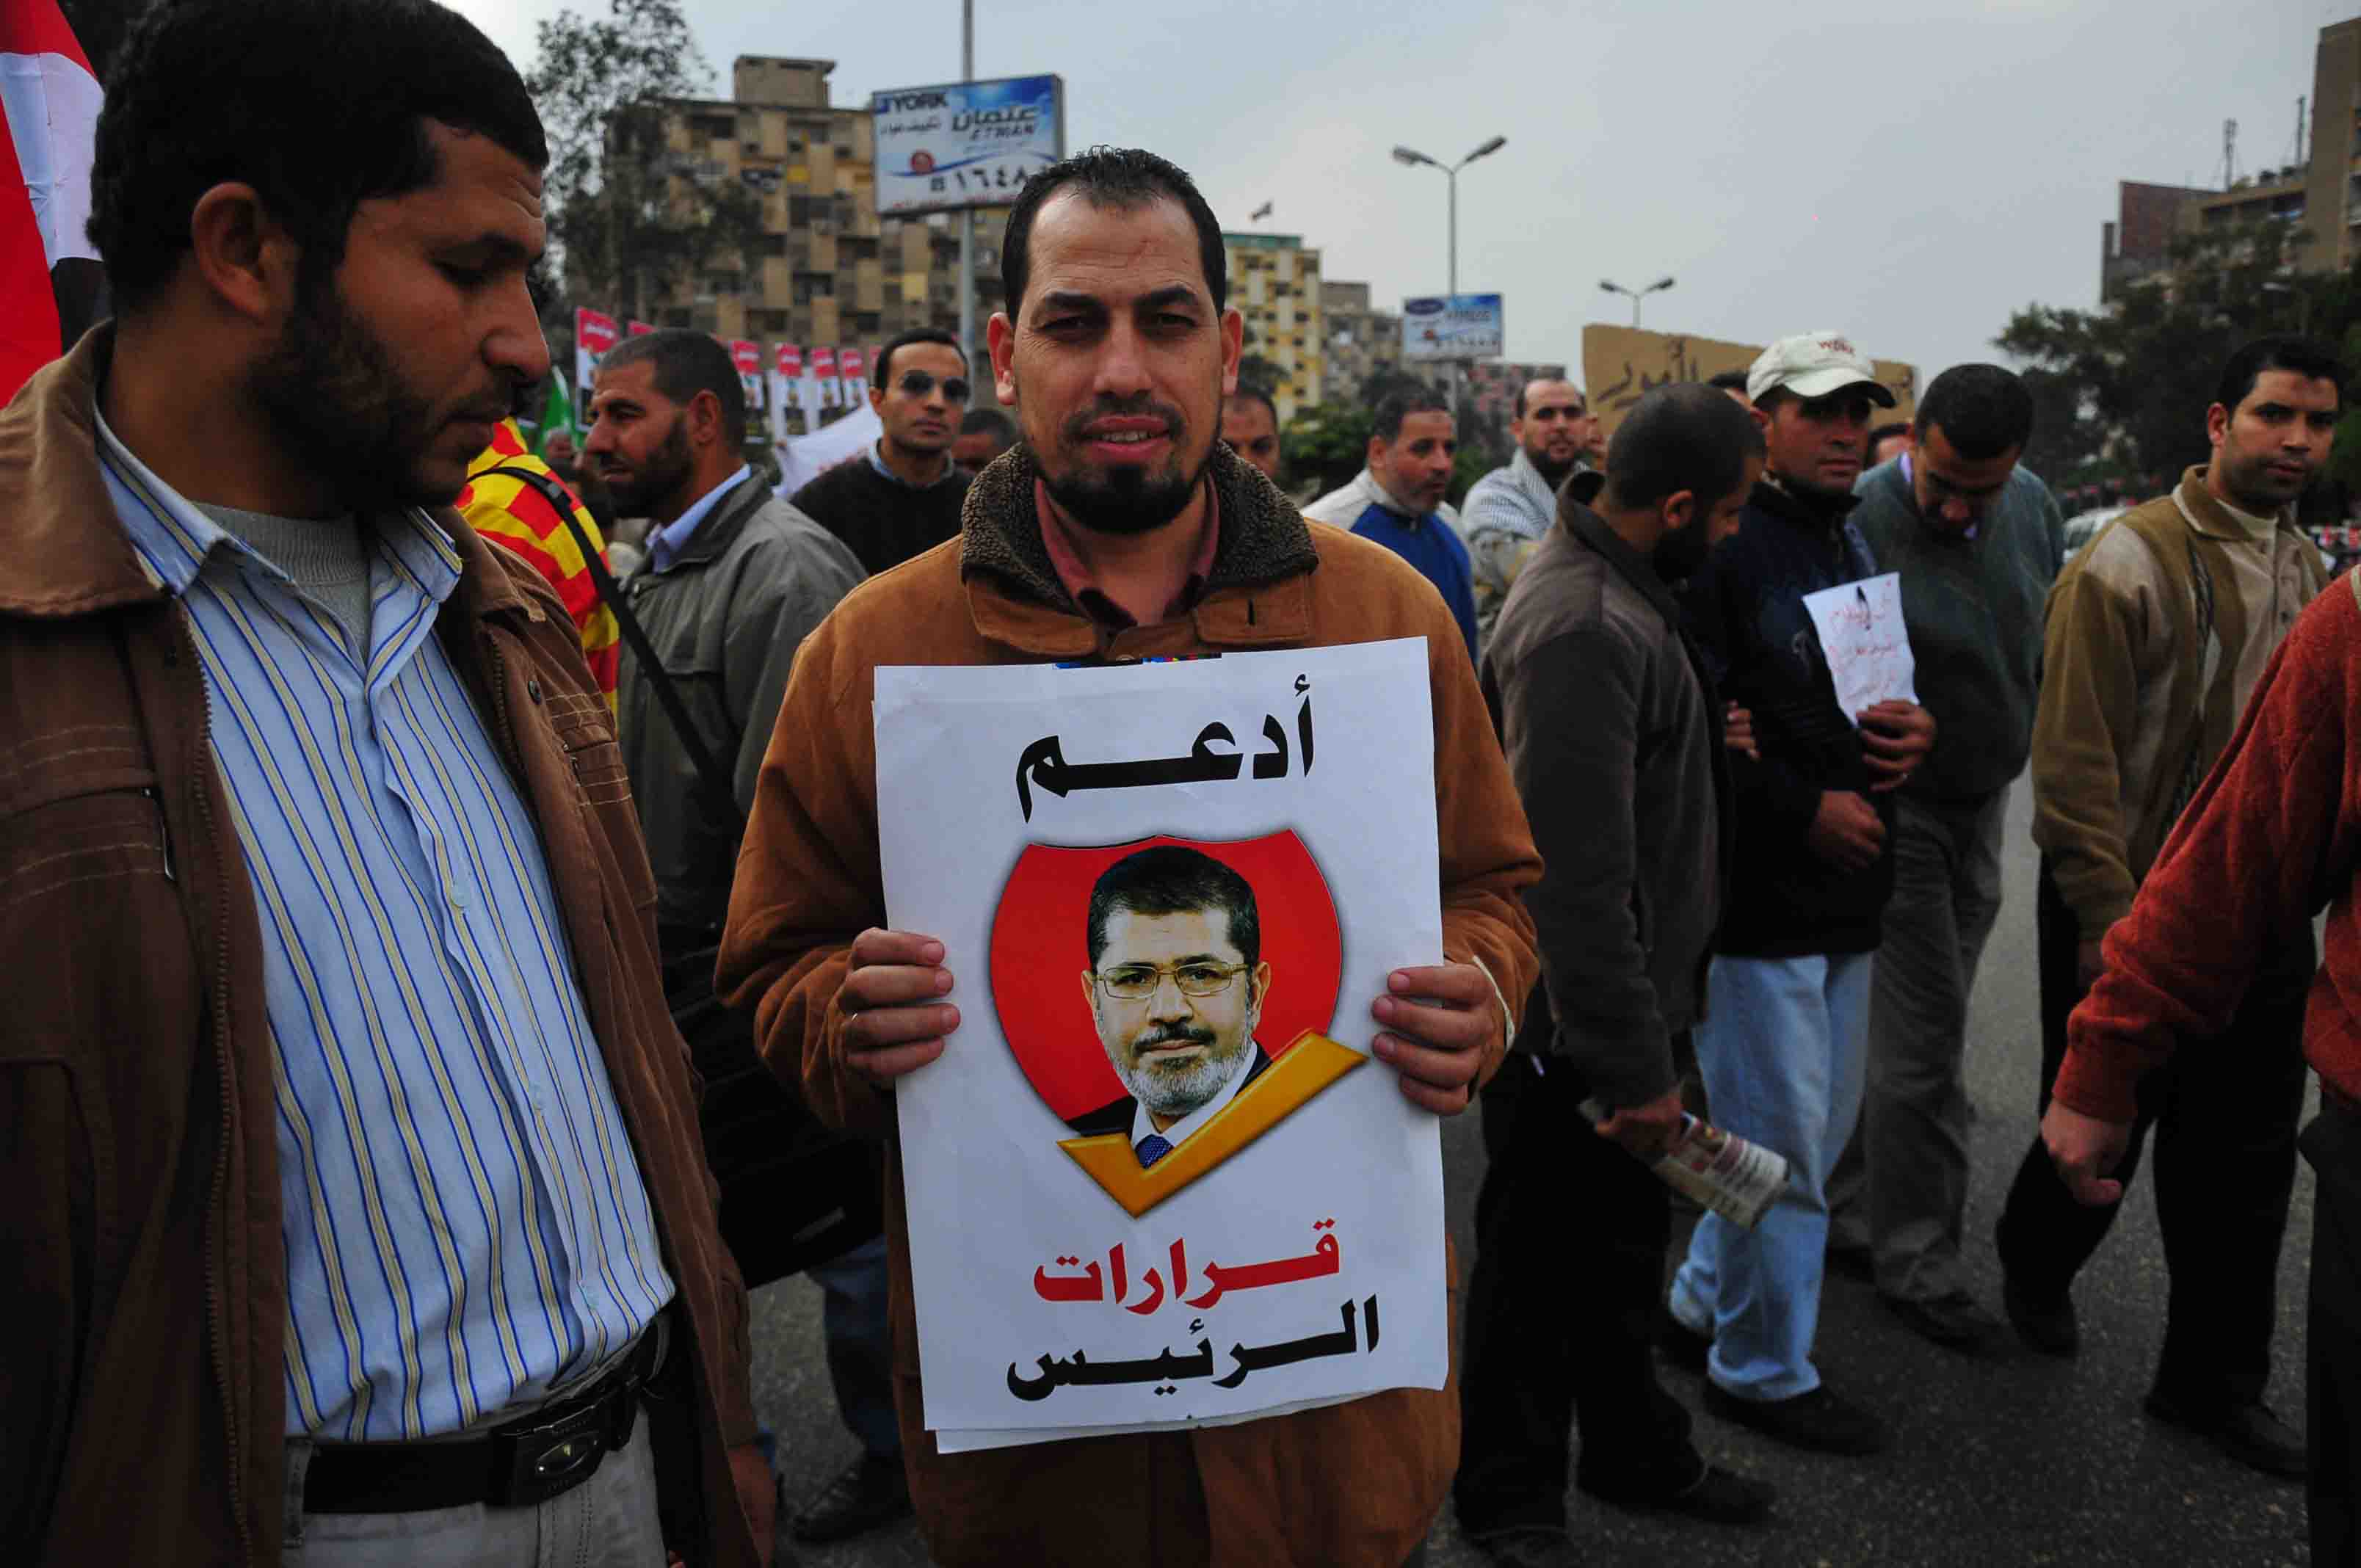 President Morsy supporters demonstrate by Rabaa Al-Adawiya Mosque in Heliopolis (Photo by Hassan Ibrahim)